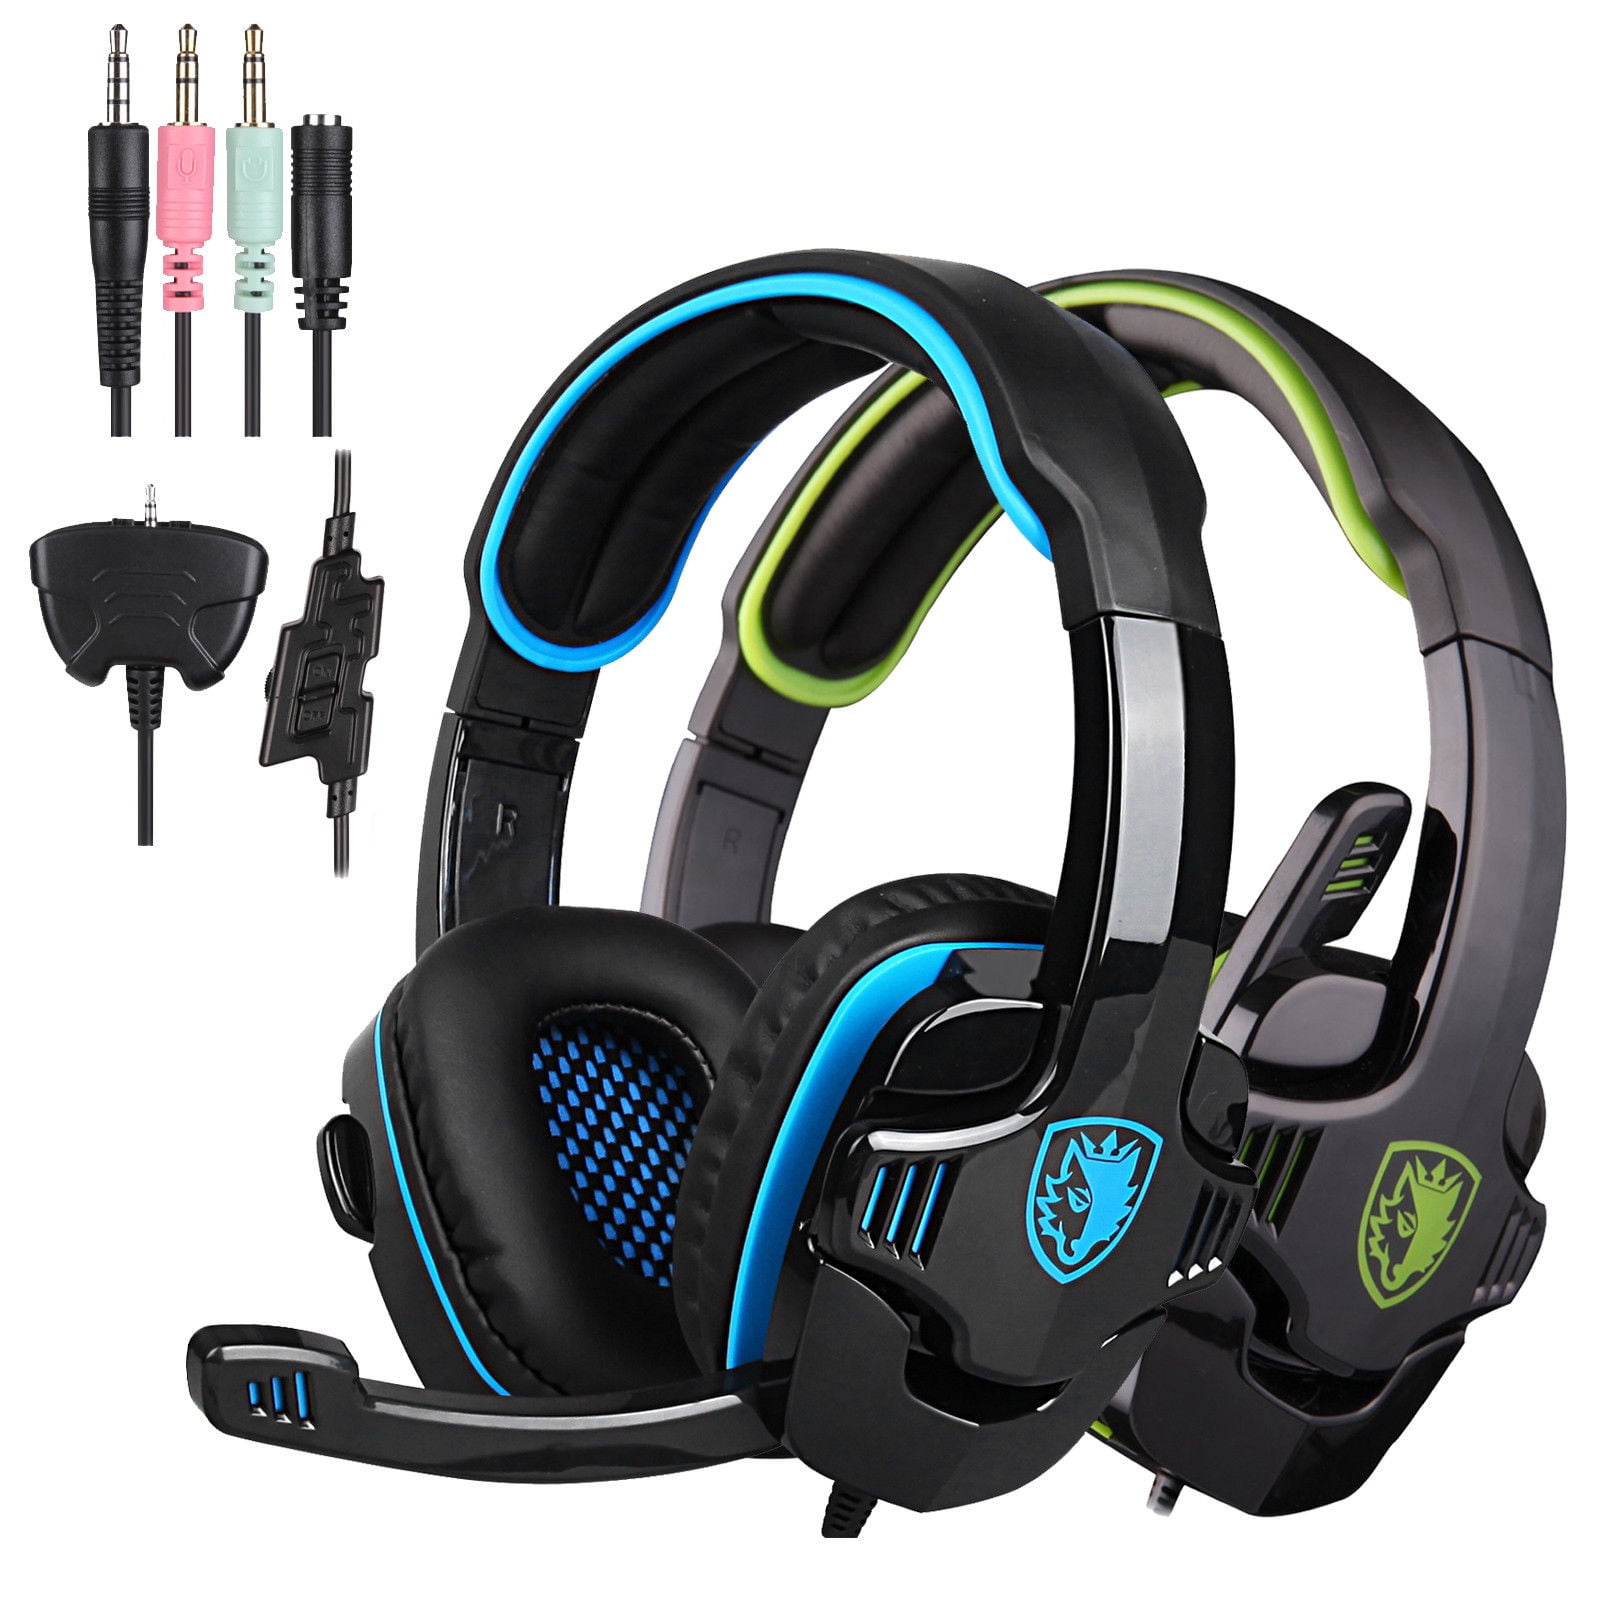 SADES SA-708 GT PS4 for Microphone SmartPhone PC Stereo Headset Laptop(Green) Mac HiFi Xbox360 with iPhone Gaming Headphone